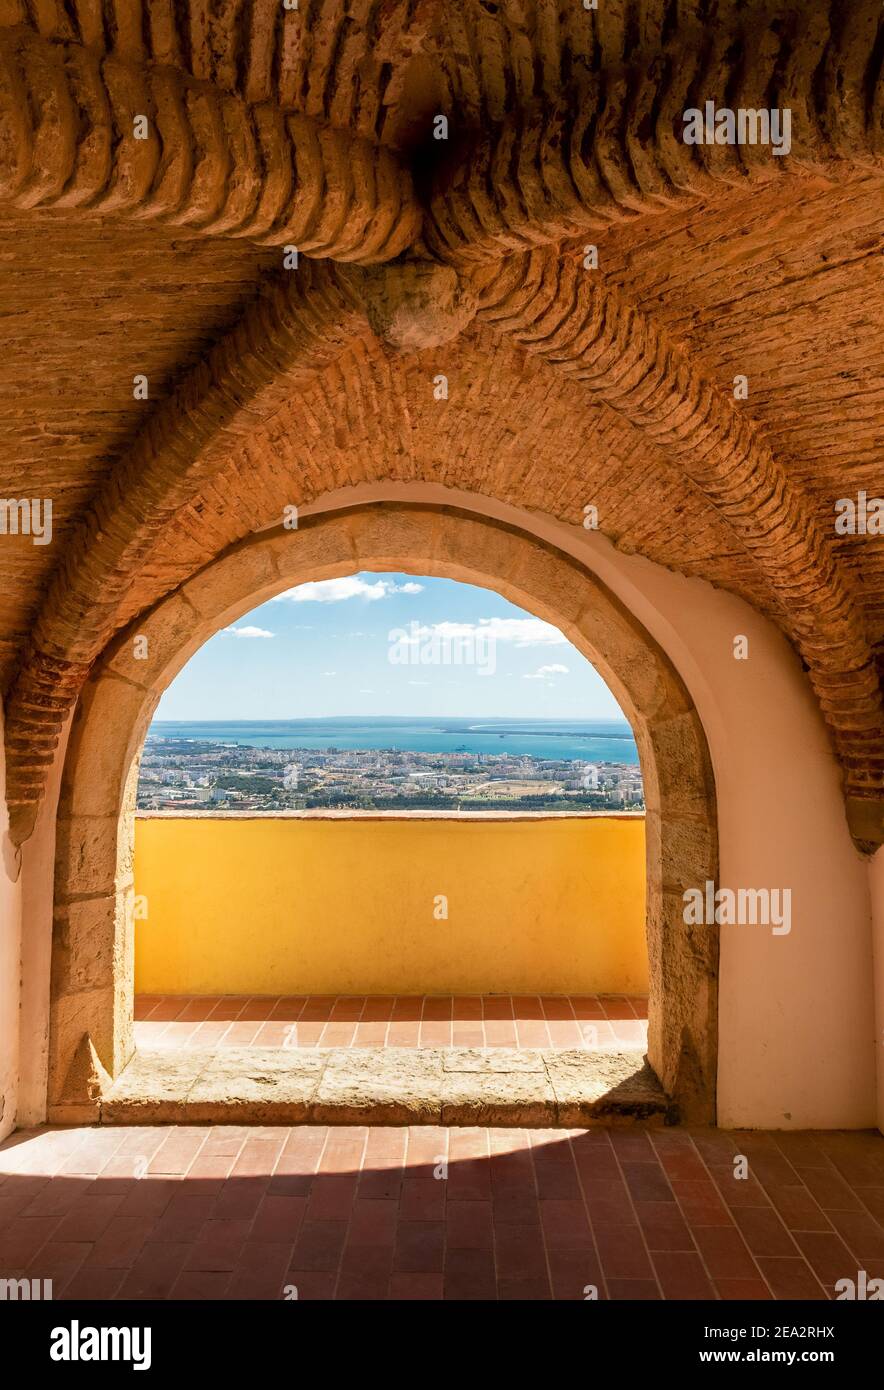 Palmela, Portugal - August 29, 2020: Vault and portal at the castle of Palmela, in Portugal, overlooking the city of Setúbal and the river Sado. Stock Photo